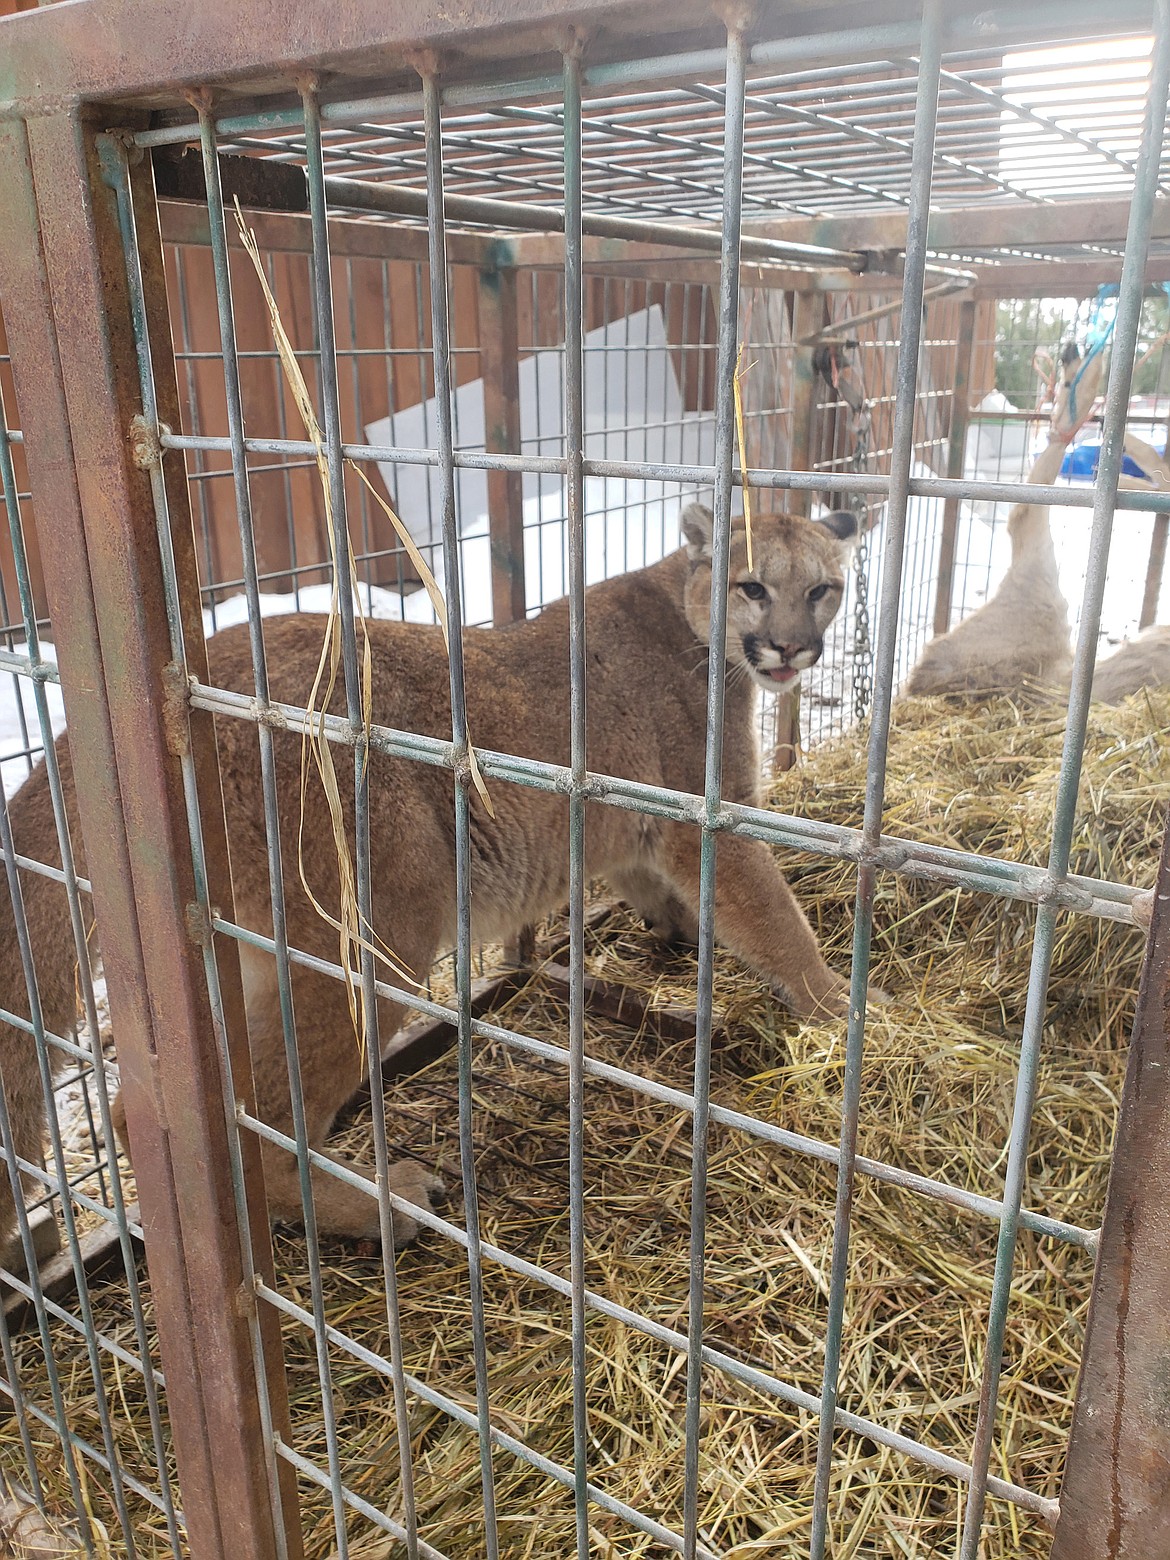 This mountain lion was euthanized after Montana Fish, Wildlife &amp; Parks officials determined it had become habituated to people. The lion was trapped at the residence of an Eureka woman Jan. 19. (Submitted photo)